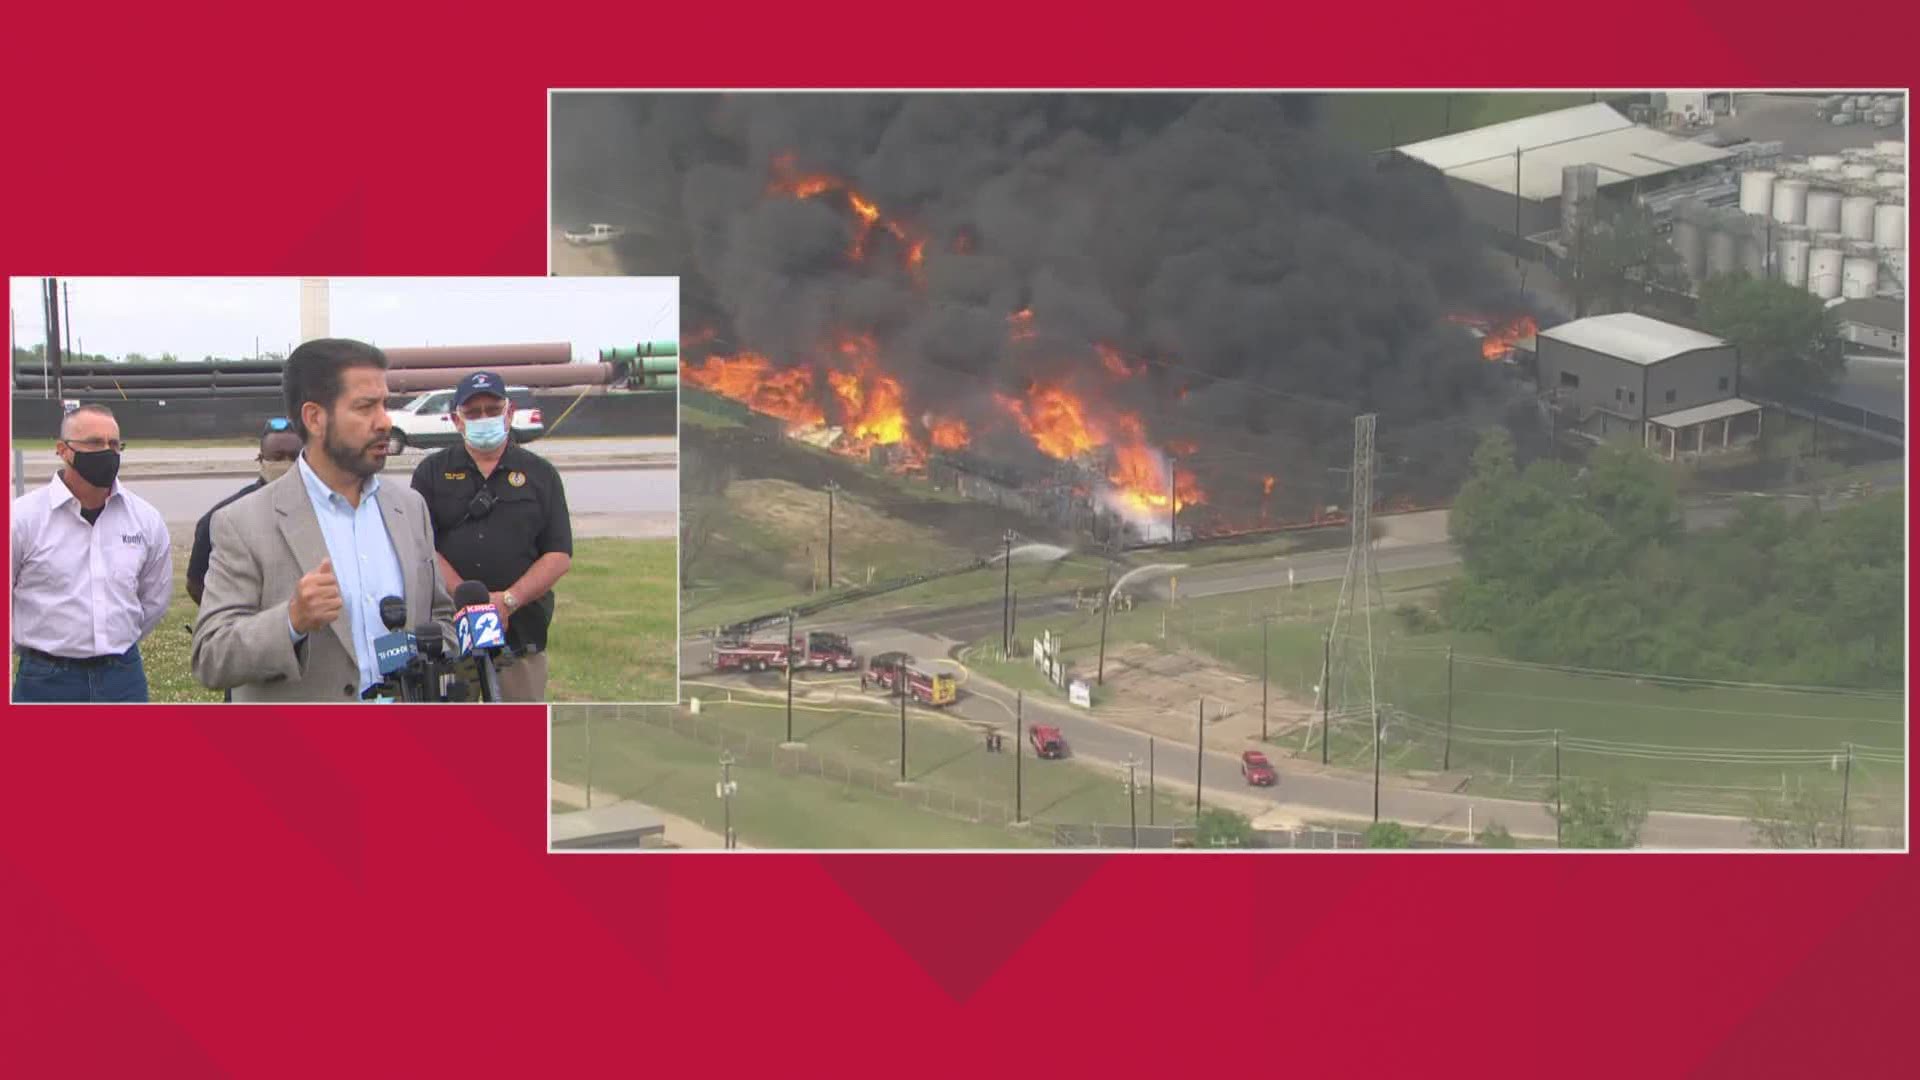 Officials gave an update on the industrial fire at the K-Solv facility in the 1000 block of Lakeside Drive.